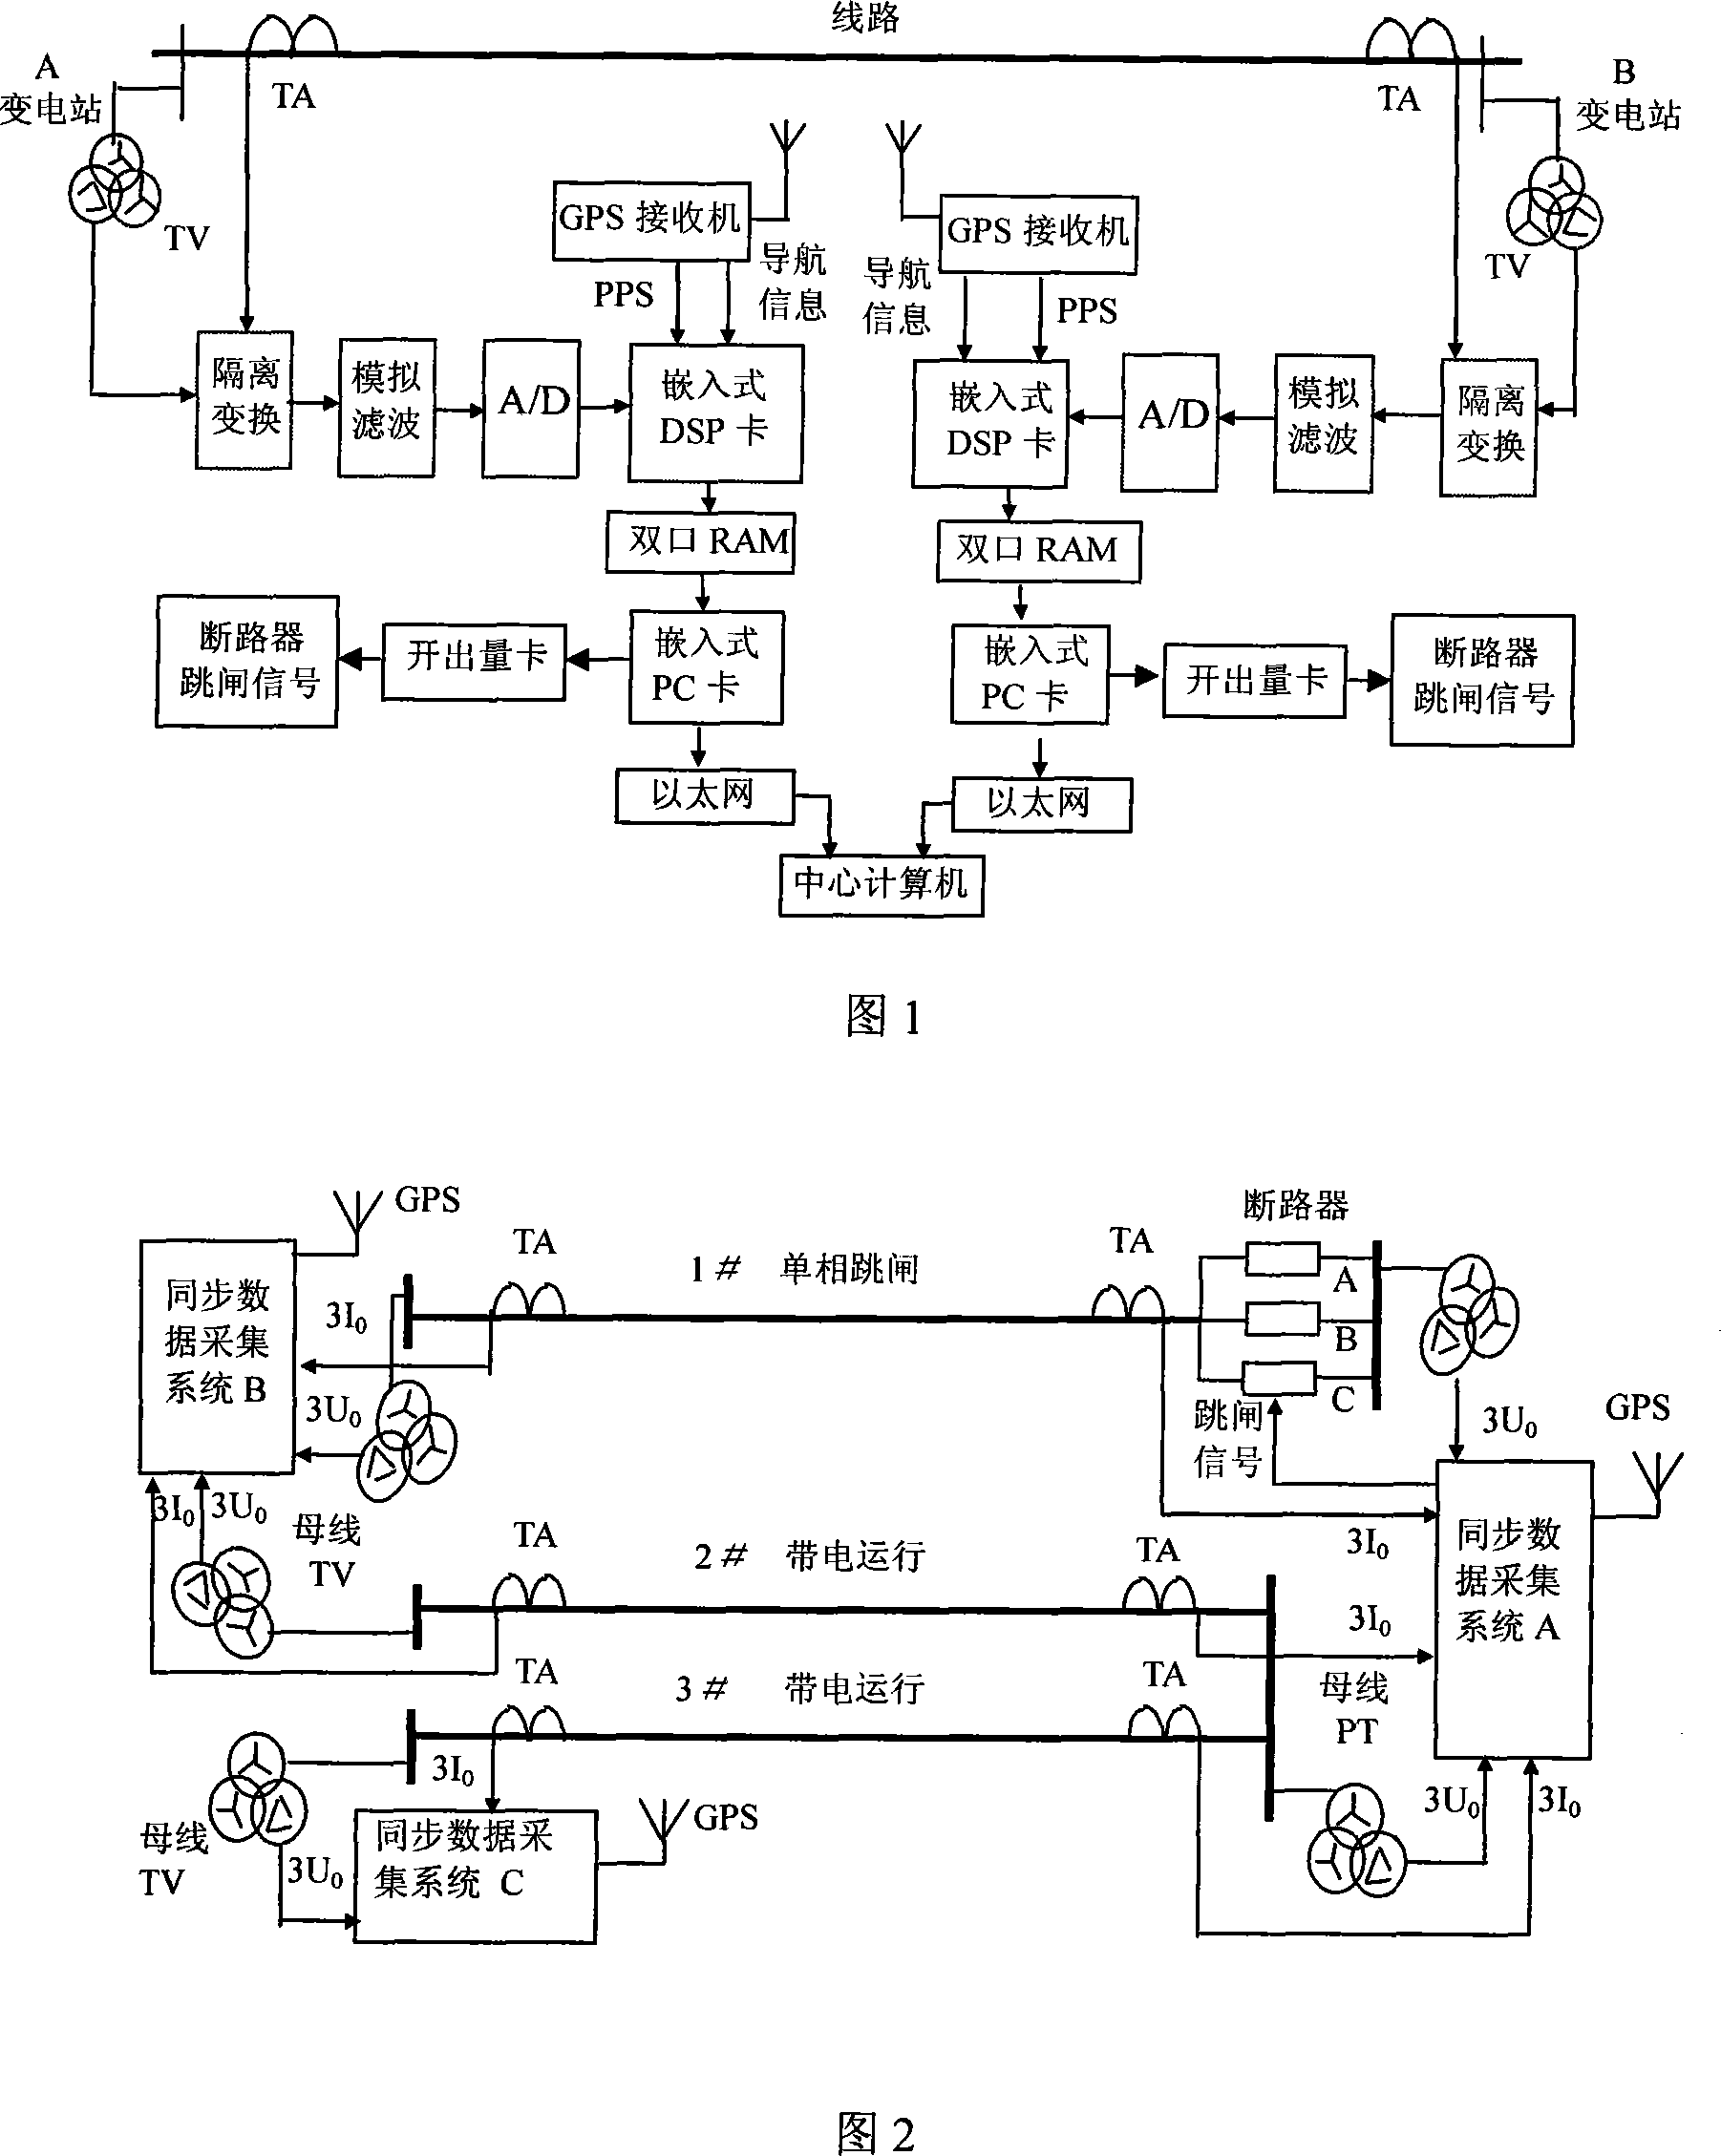 Zero sequence parameter live line measurement device of mutual inductance circuit